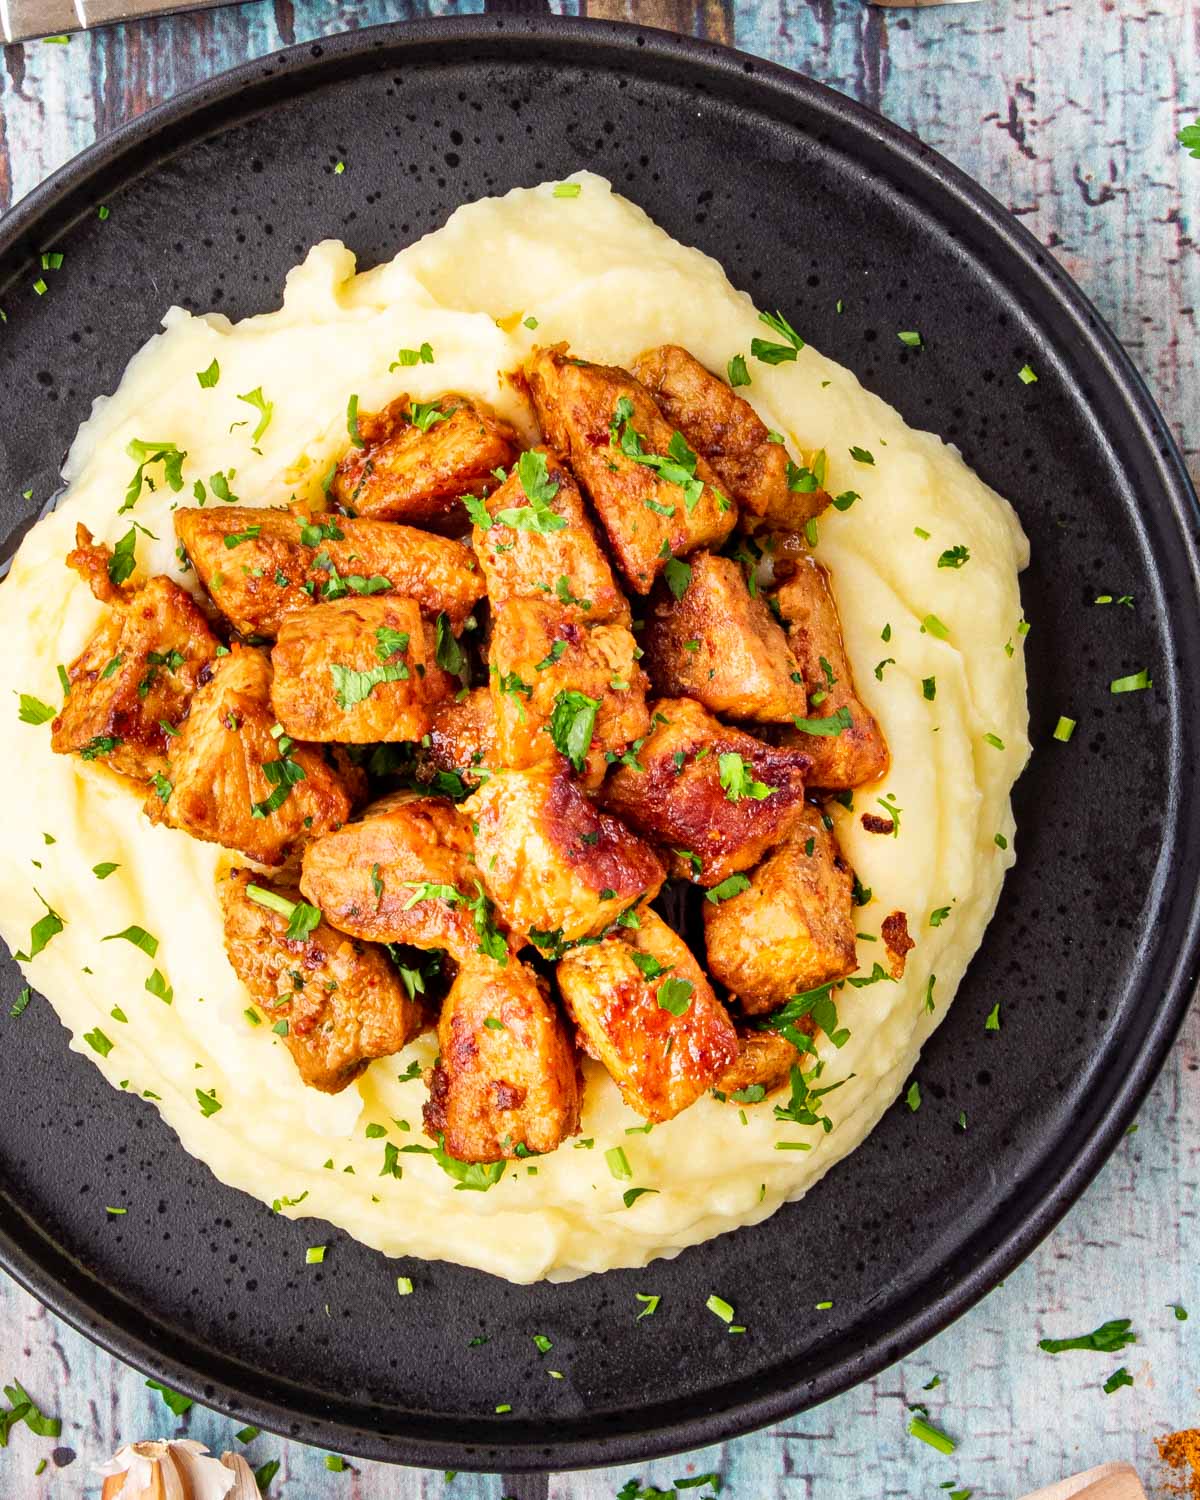 cajun pork bites on a bed of mashed potatoes on a black plate.